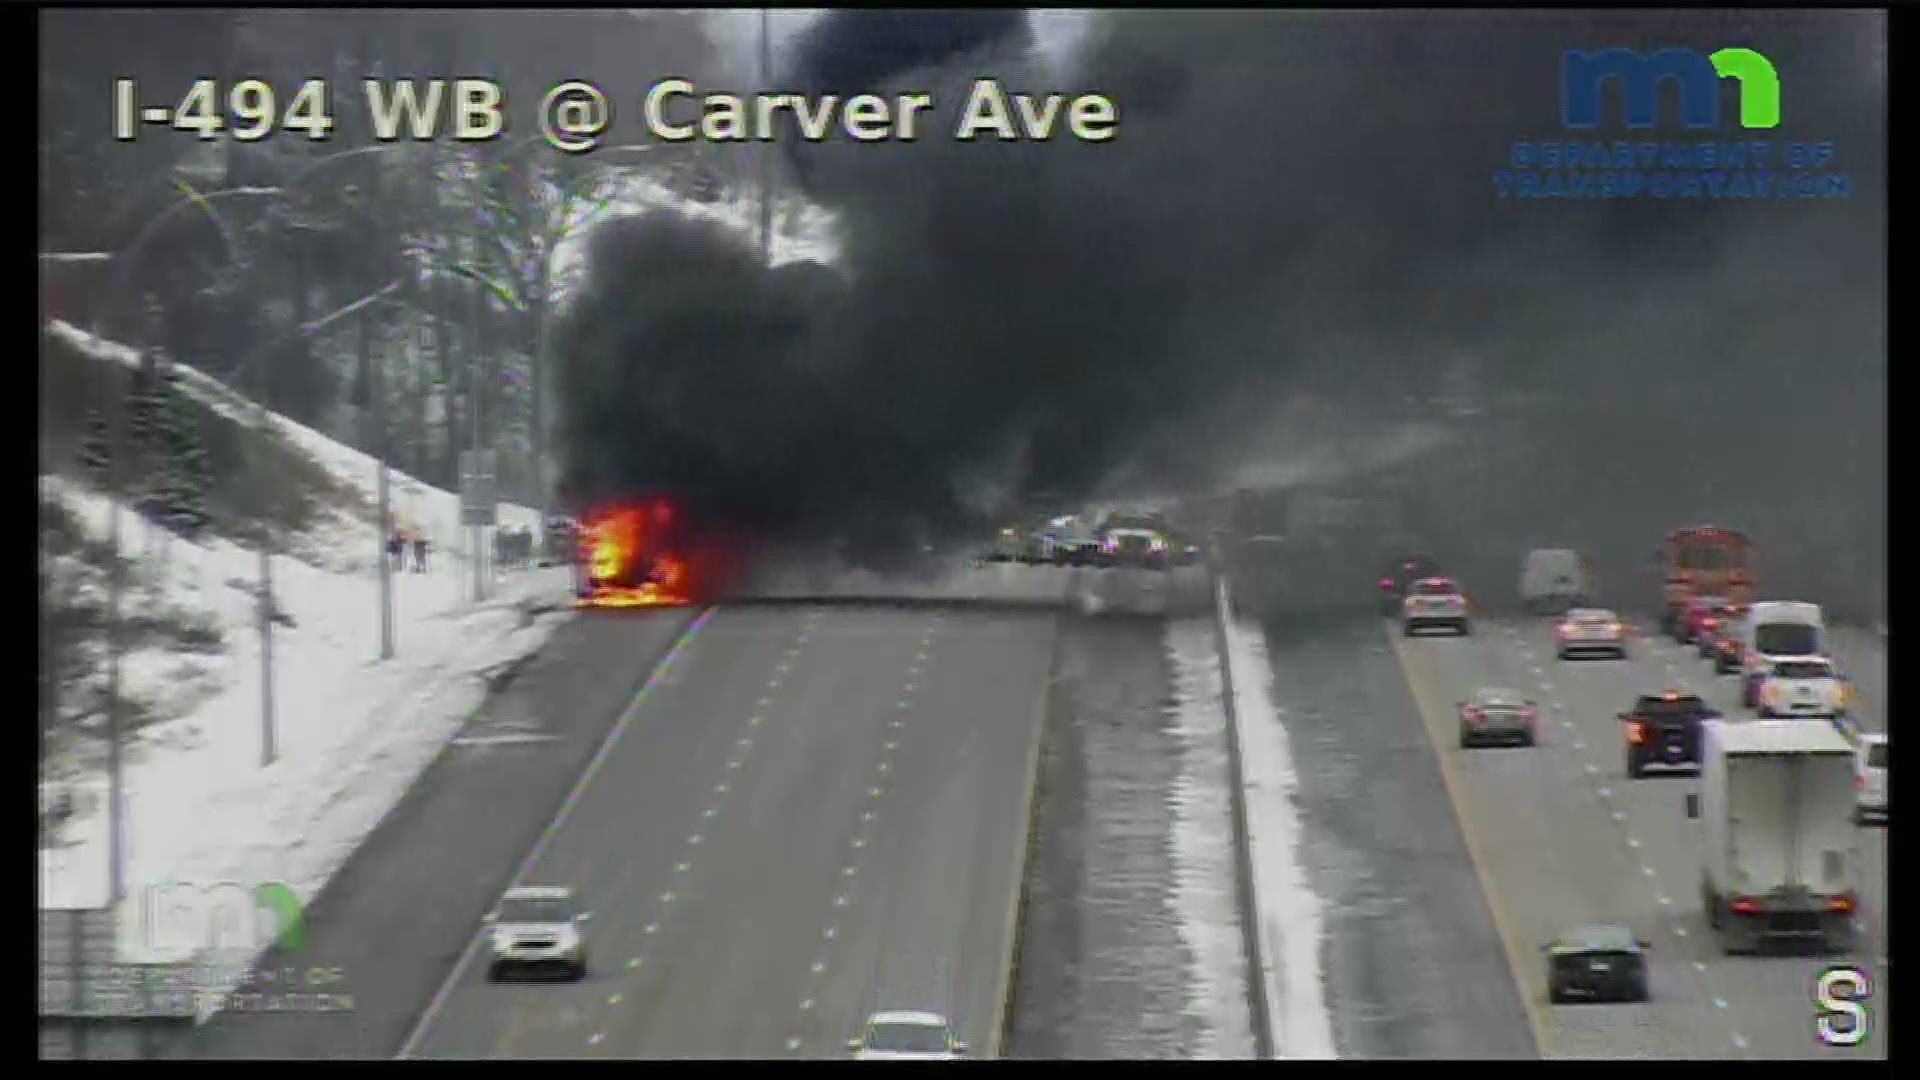 A vehicle fire shut down traffic on I-494 headed eastbound near Carver Ave between Woodbury and Newport on Monday afternoon.